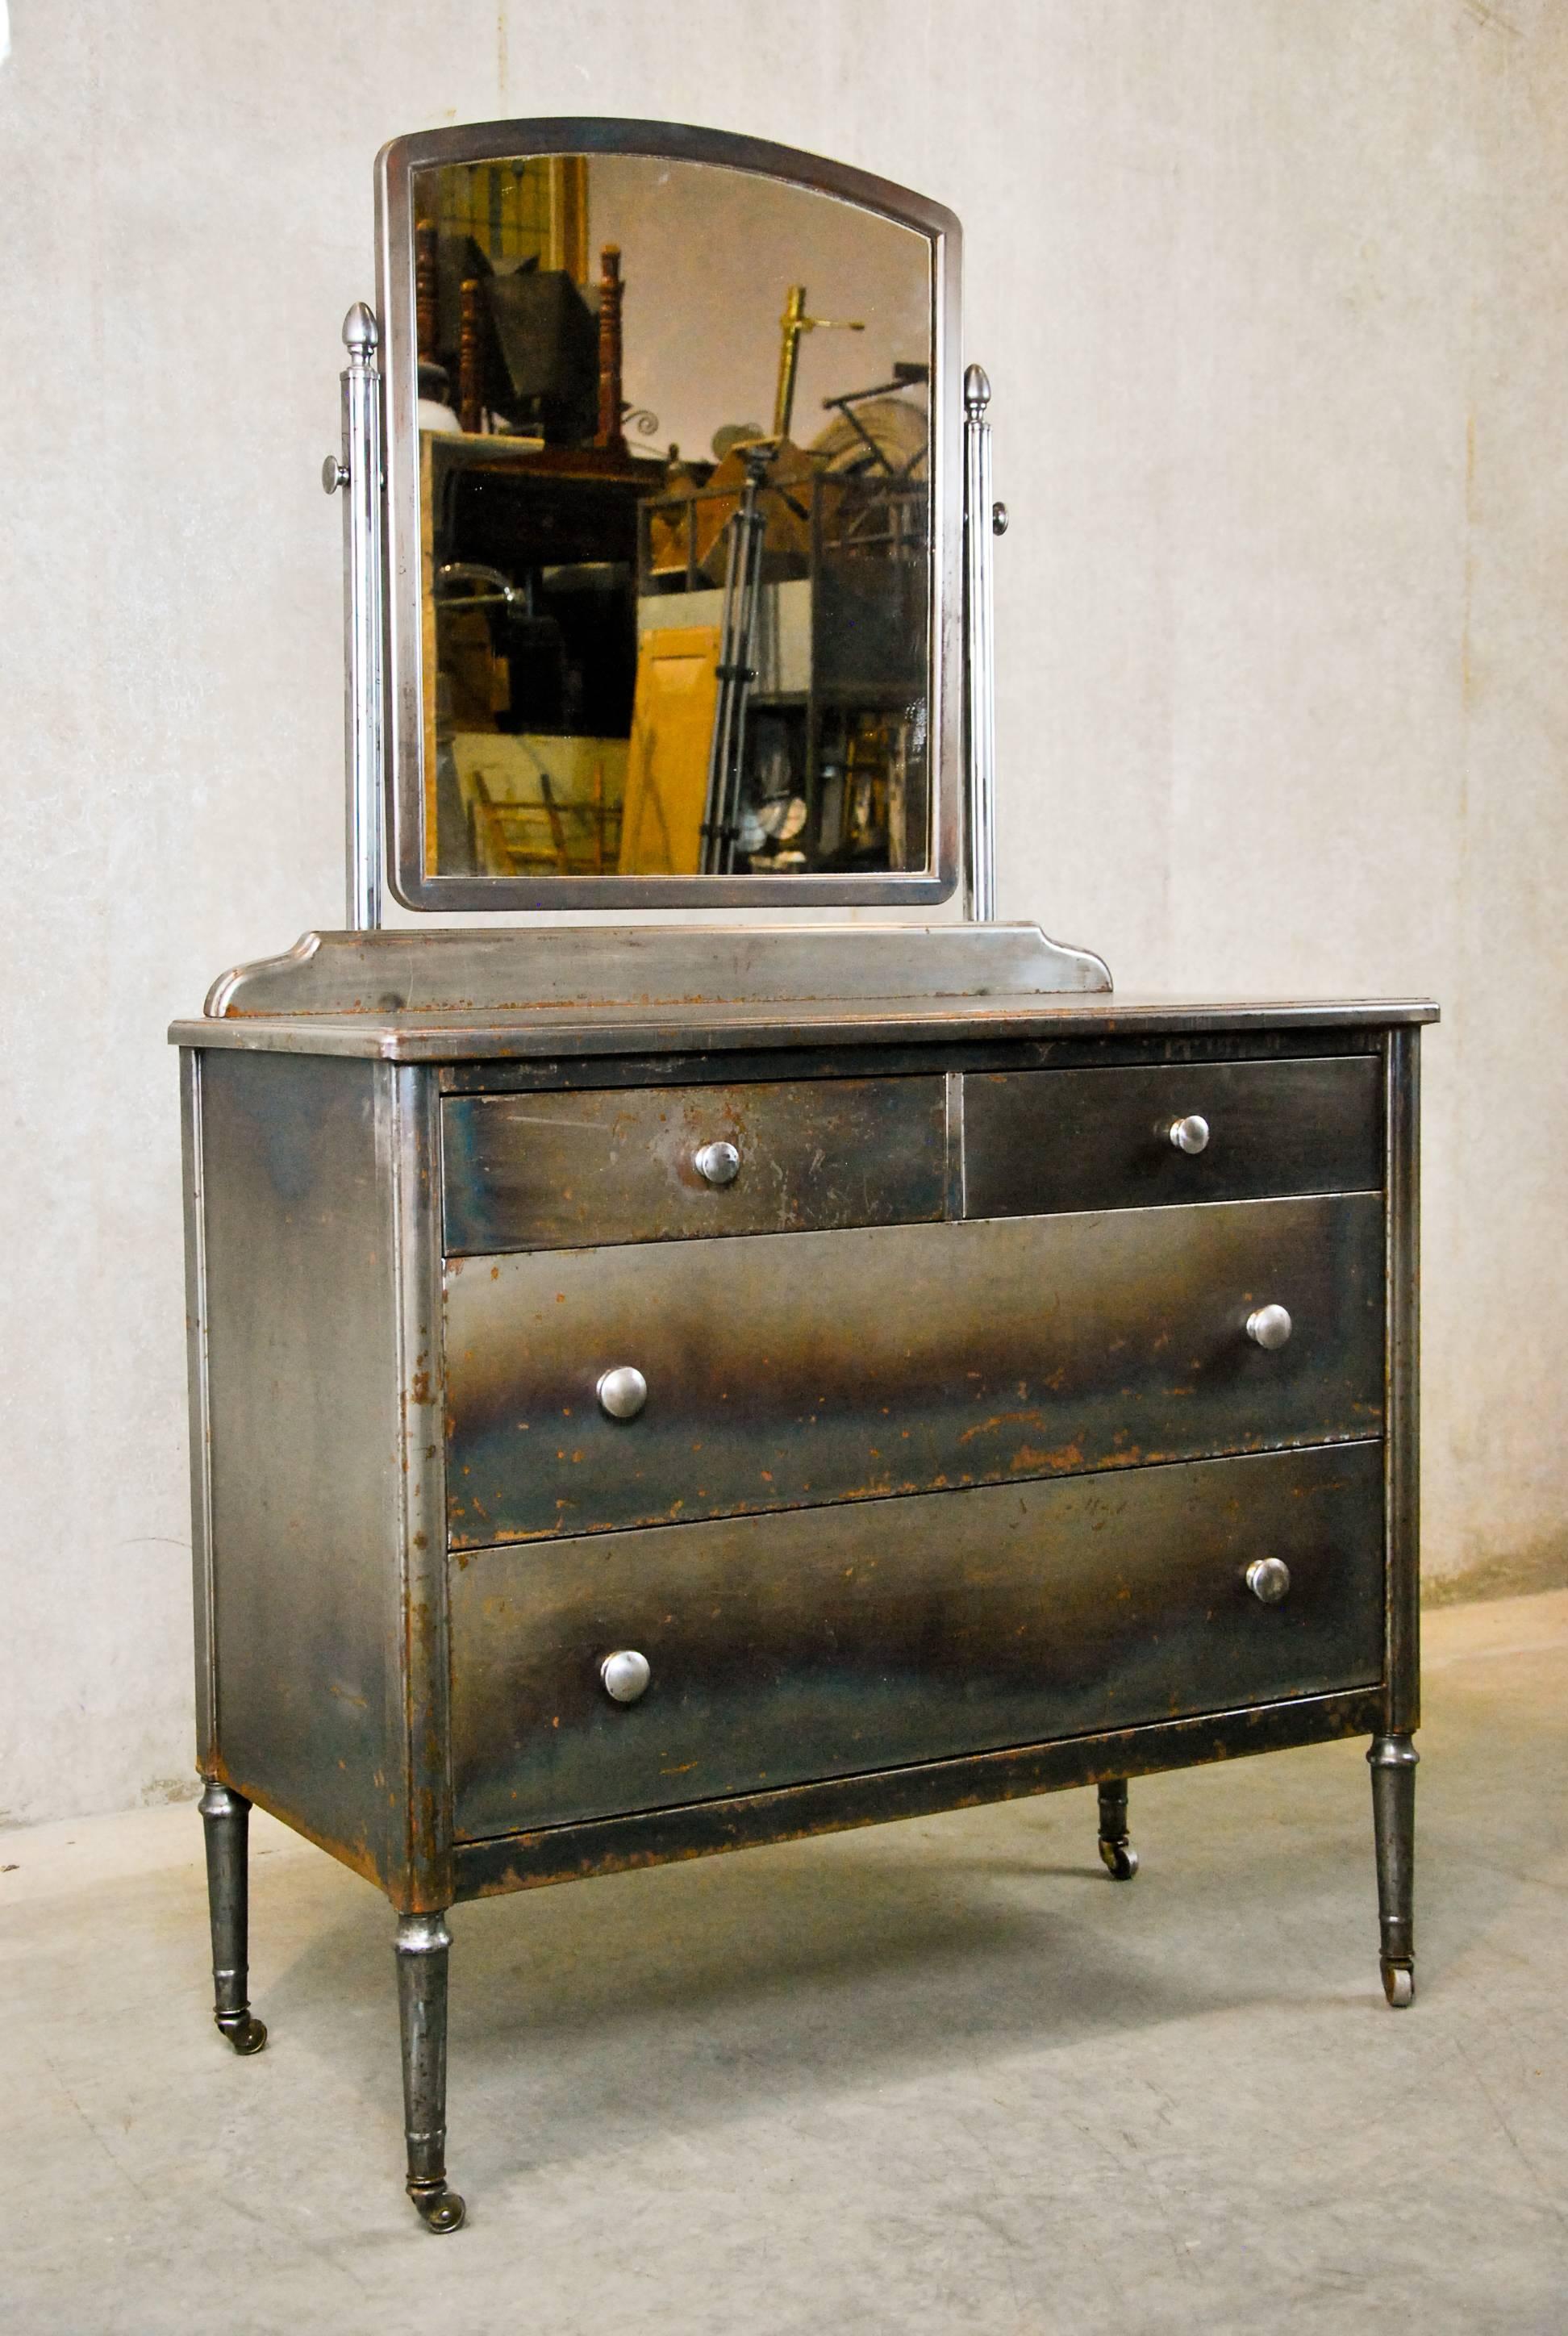 Industrial 1940 Simmons Steel Polished Chest of Drawers